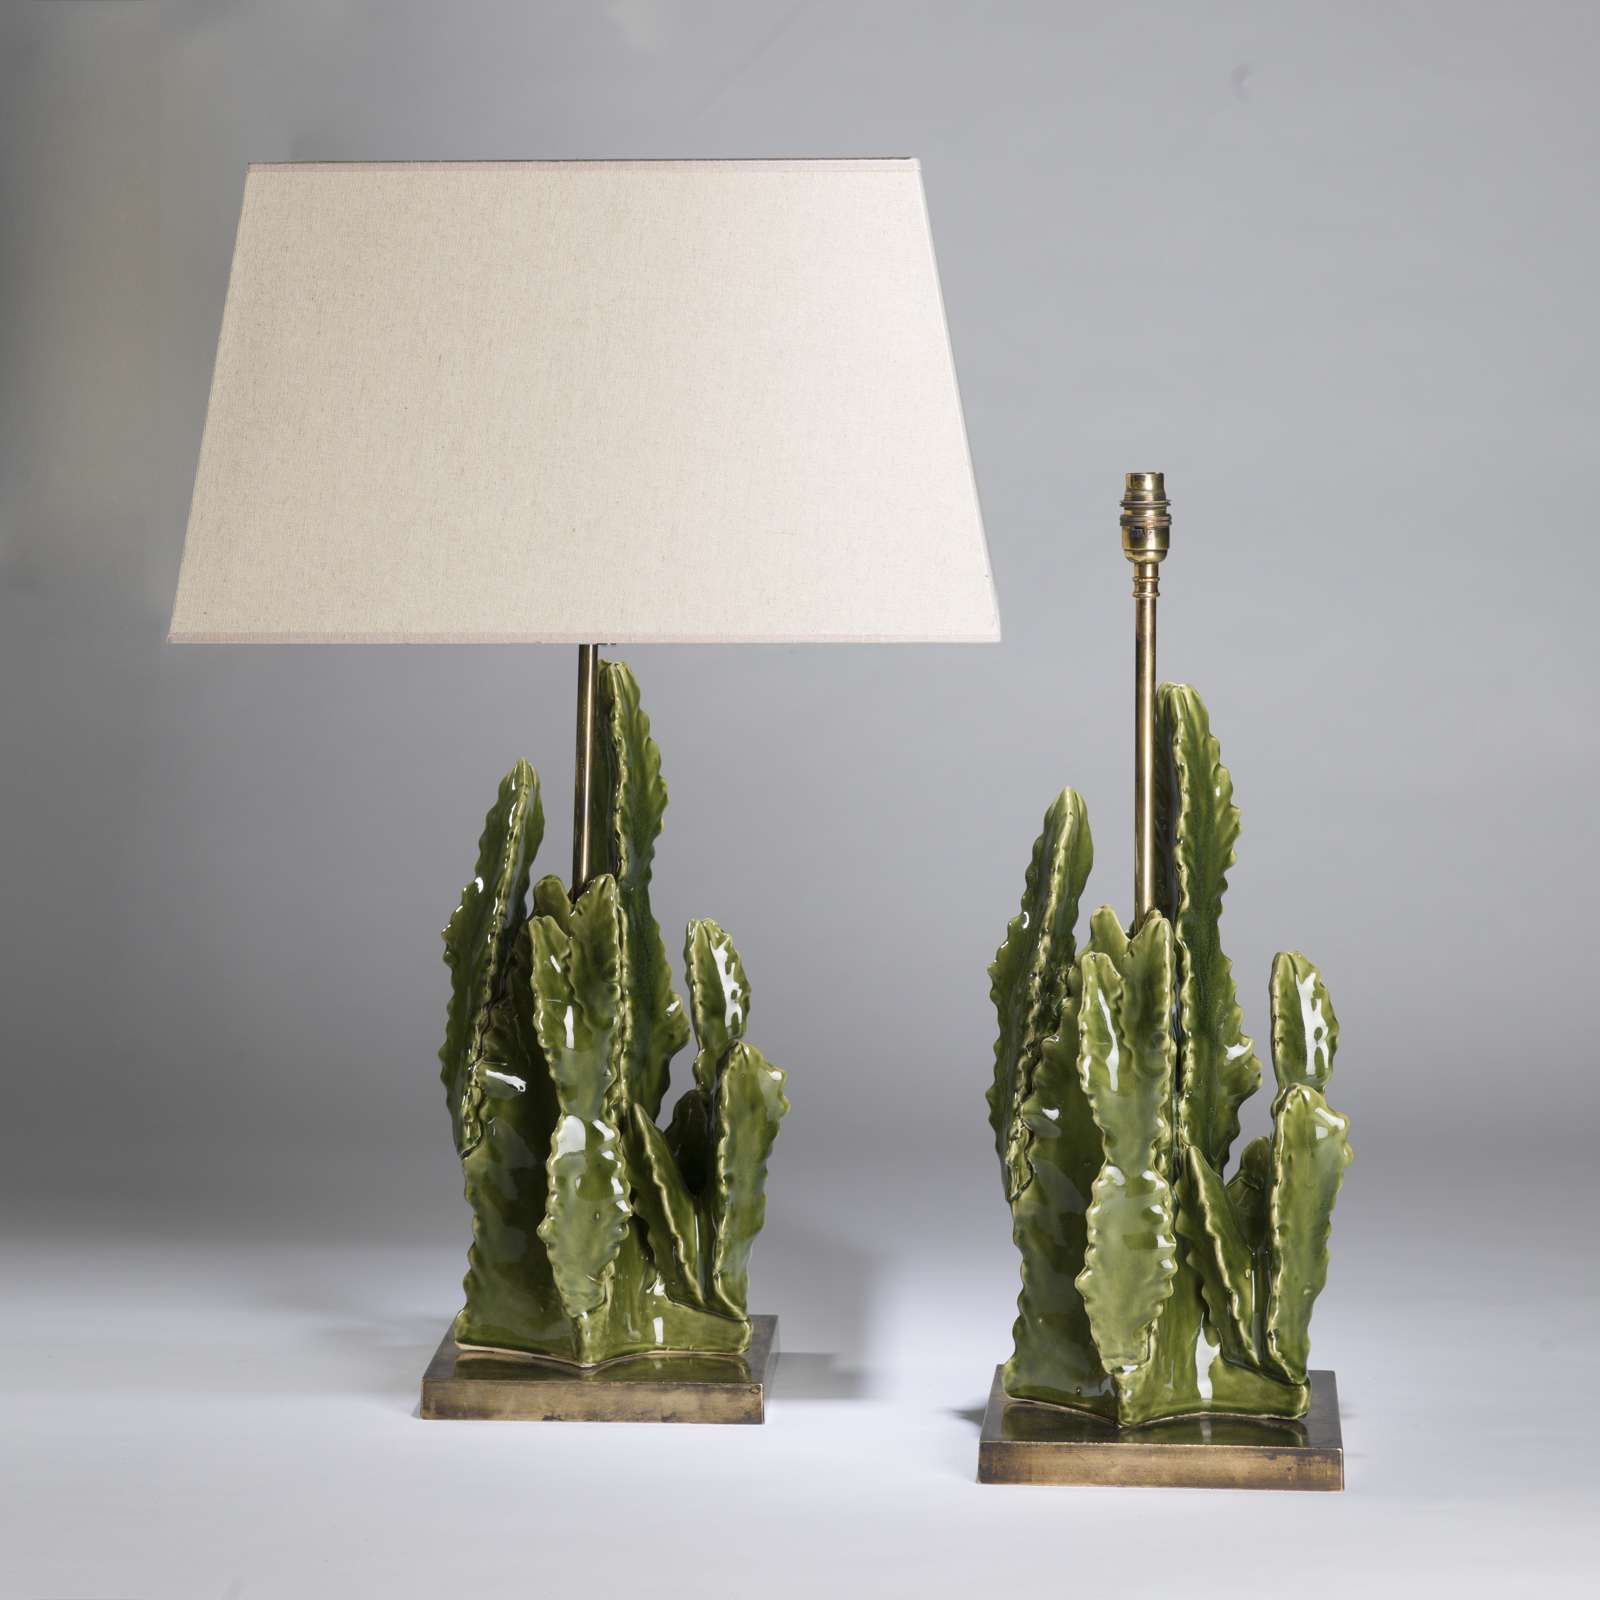 Pair Of Medium Ceramic Cactus Lamps On Square Antiqued Brass Bases (t4451)  – Tyson – Decorative Lighting And Bespoke Furniture Intended For Cactus Floor Lamps (View 14 of 20)